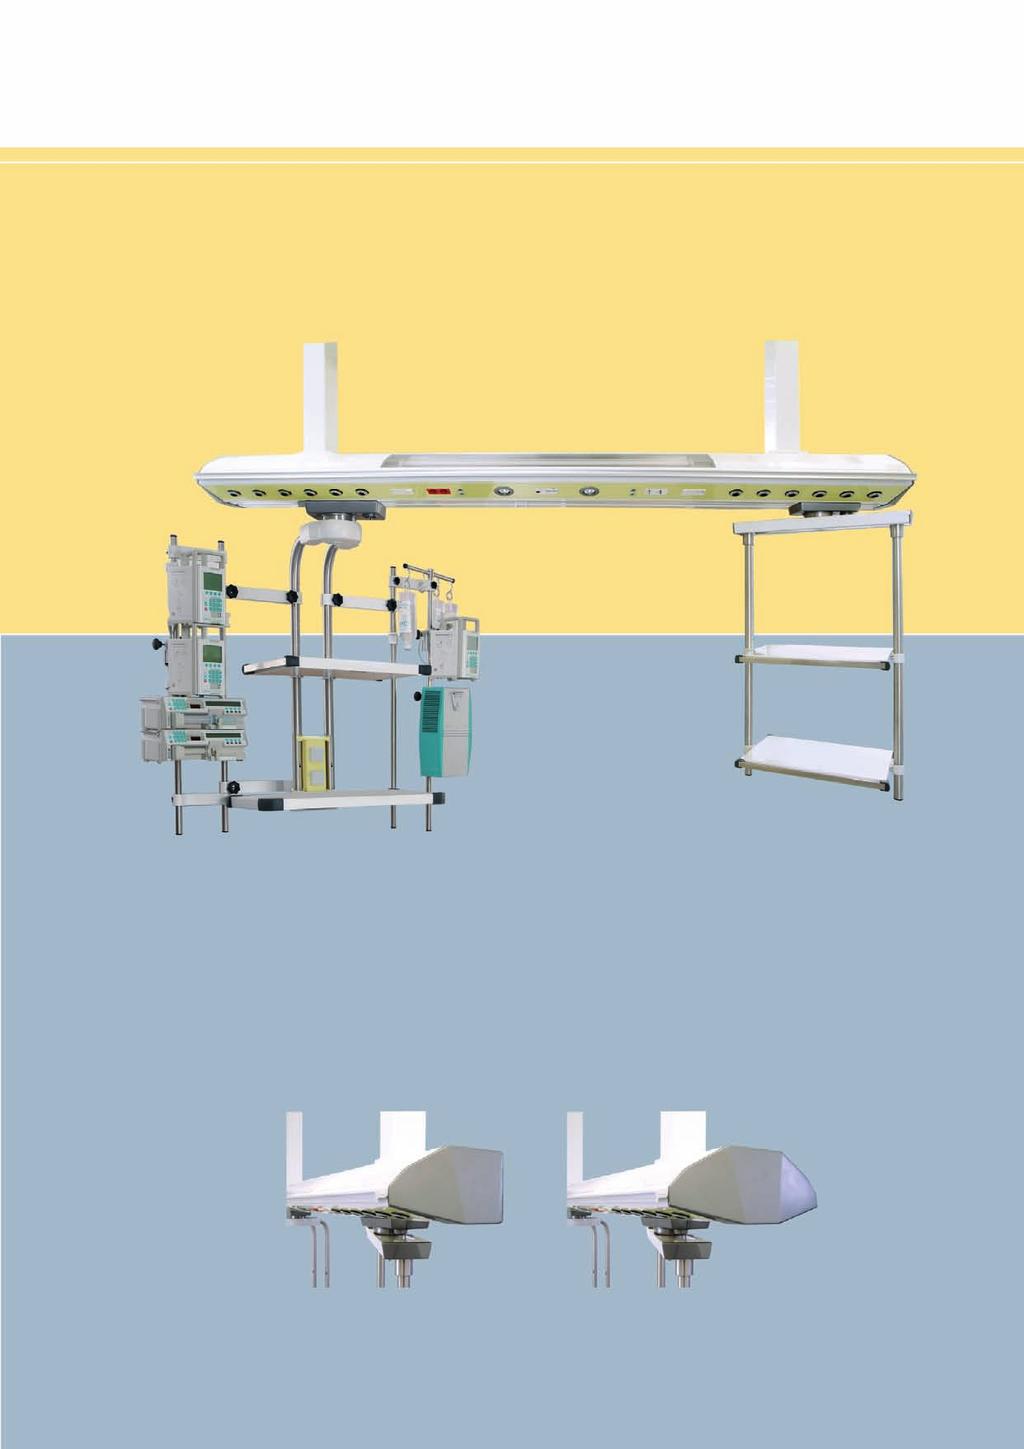 5 Independant MSU Flexible and optimal supply solutions for intensive care Independant Media Supply Unit The Independant Media Supply Unit is a ceiling-mounting service bridge with a supply system